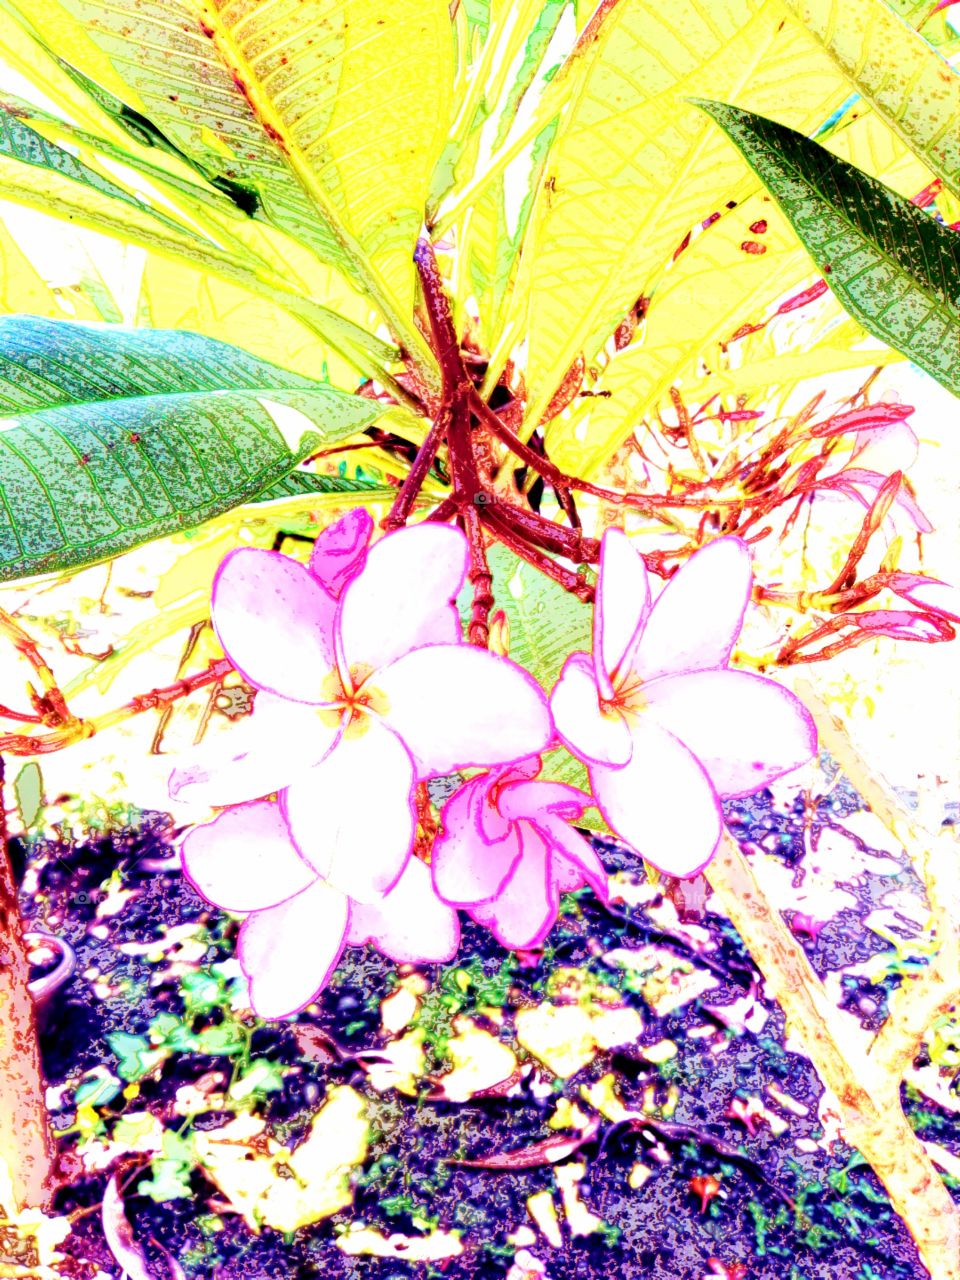 Crayon drawing of pink Frangipani flowers on tree in tropical garden